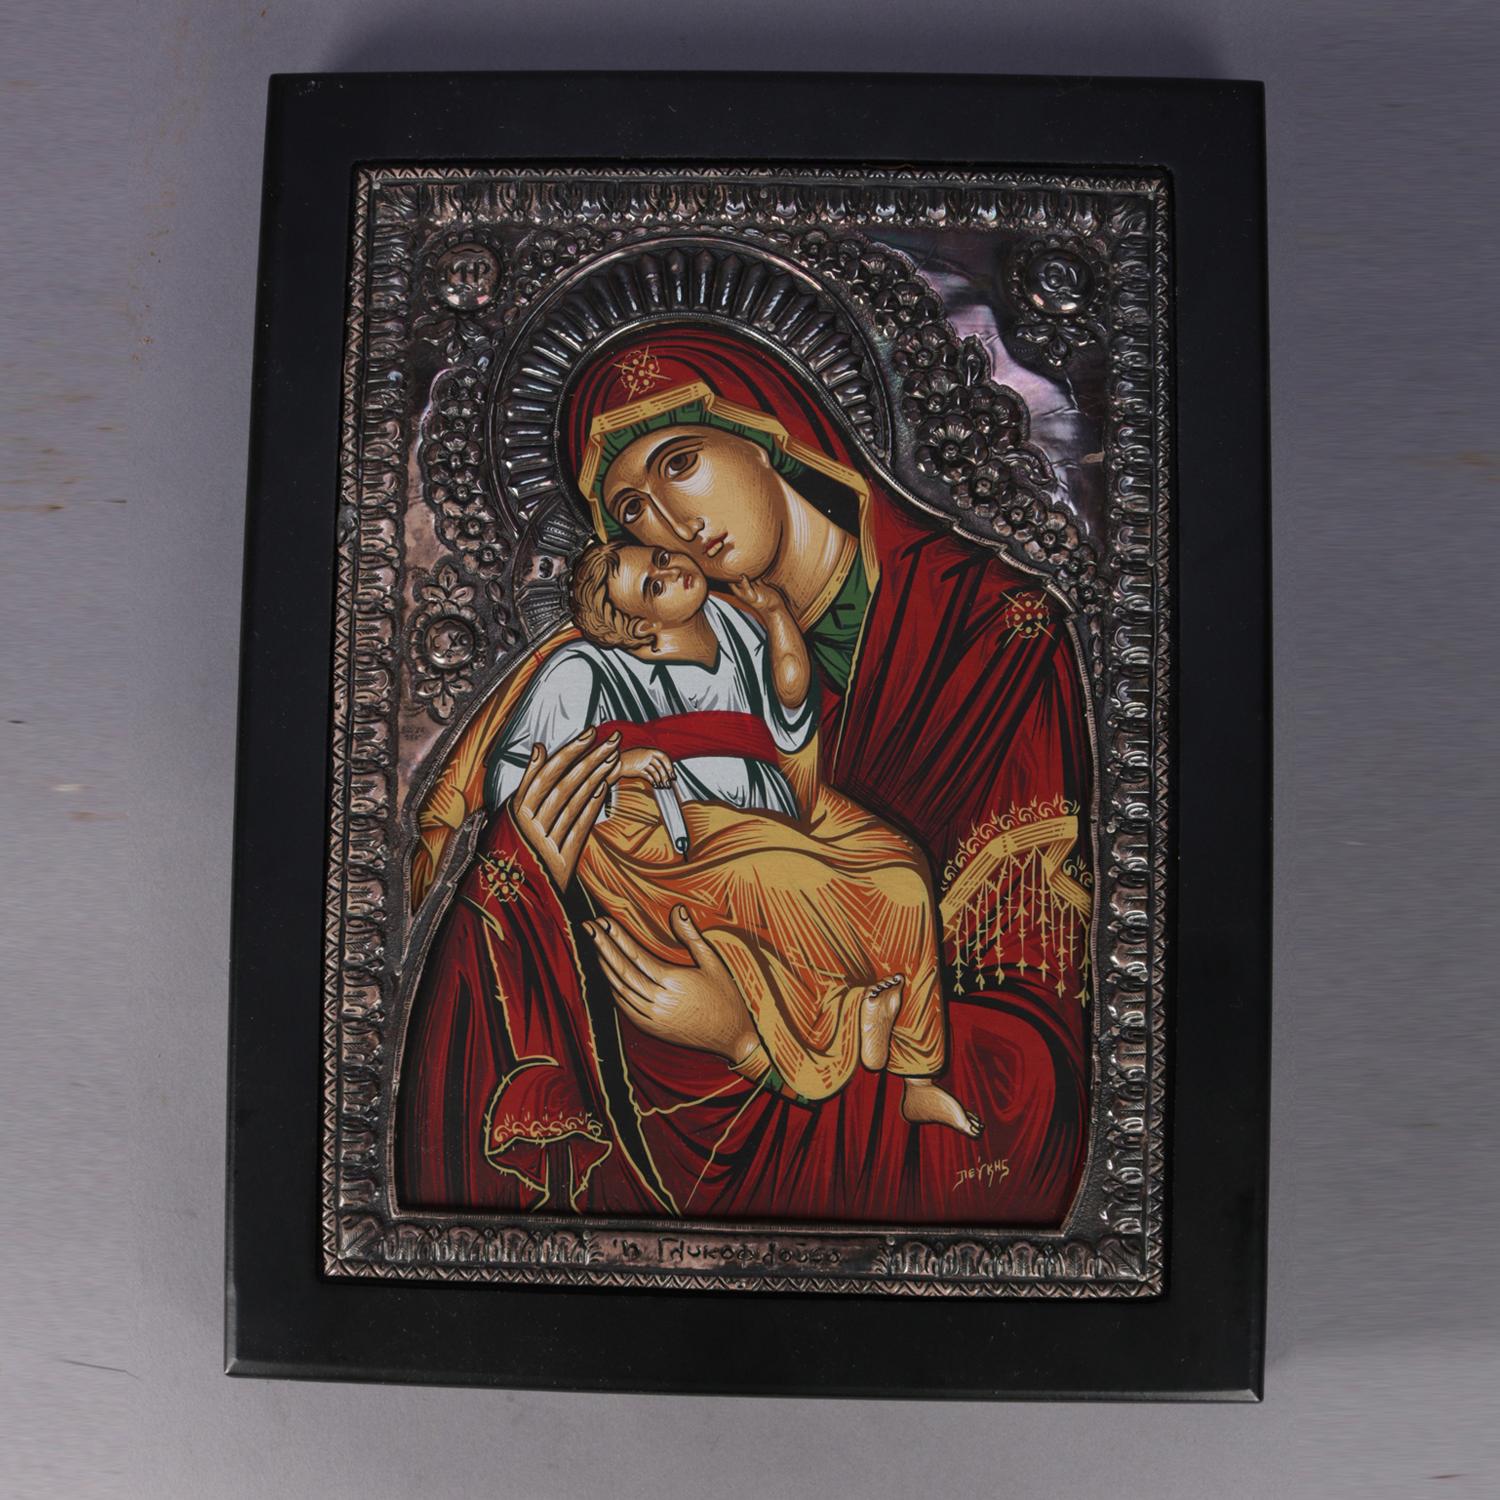 An Italian icon in embossed silver plate frame featuring Greek Orthodox Mother Mary and The Baby Jesus Christ Child, en verso certificate reads 